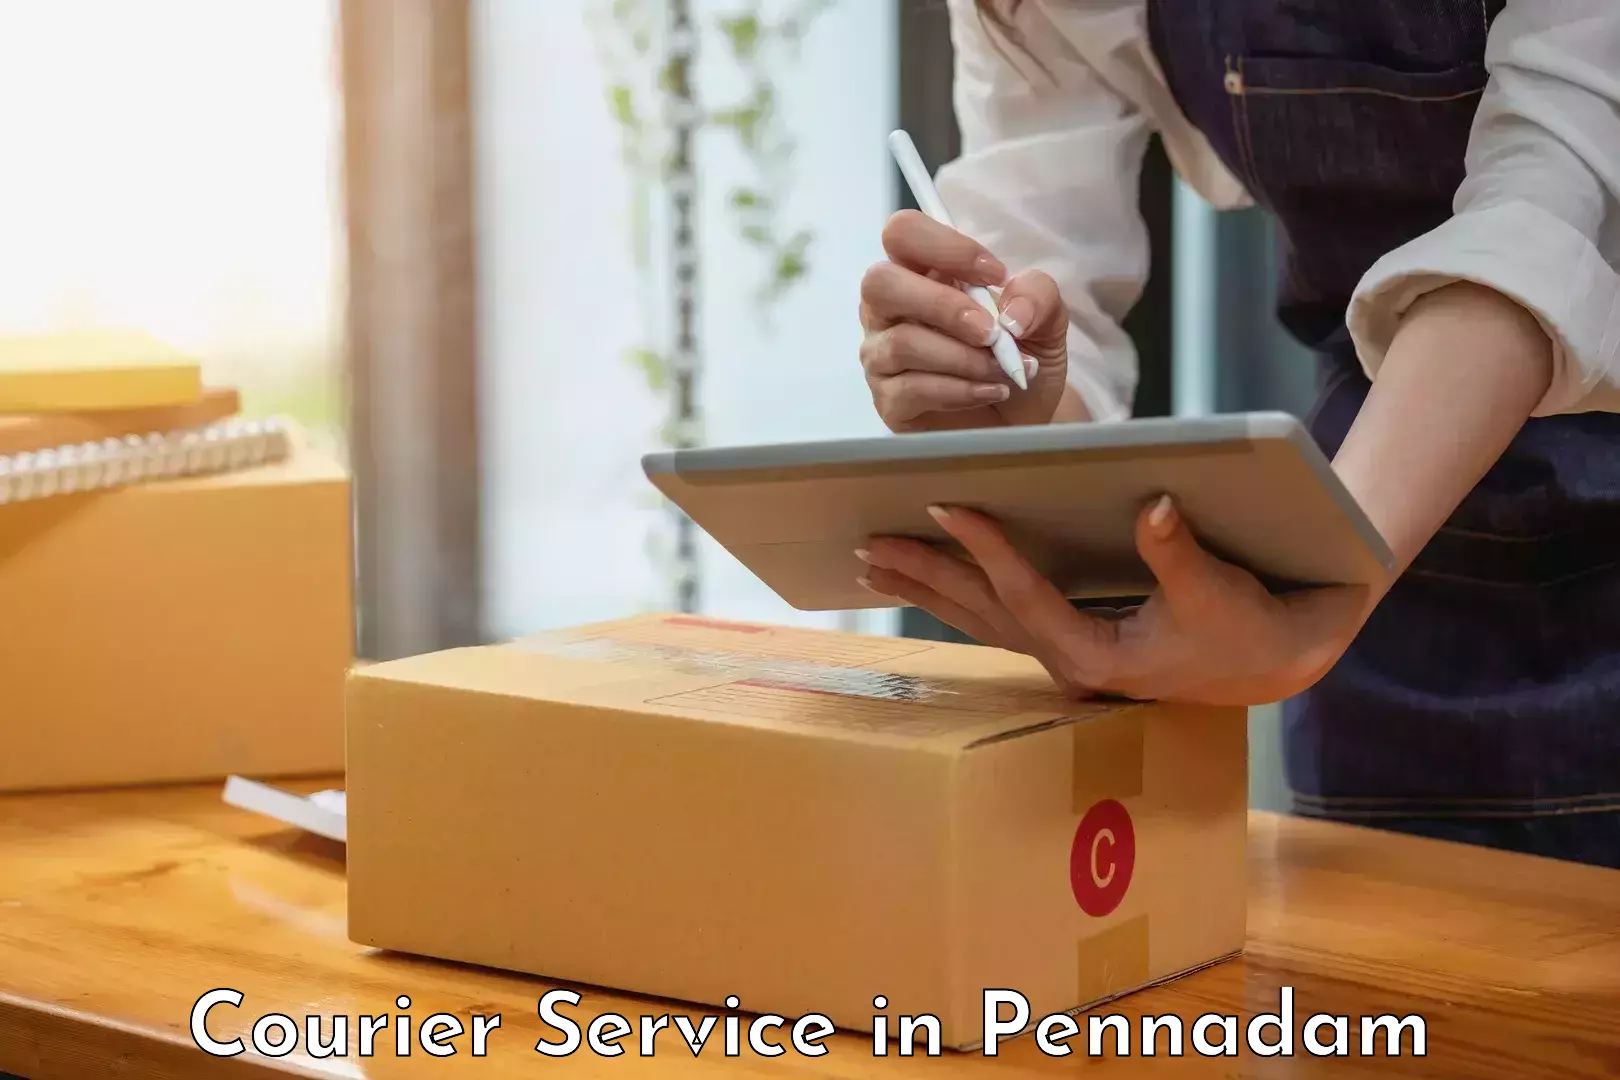 Multi-service courier options in Pennadam